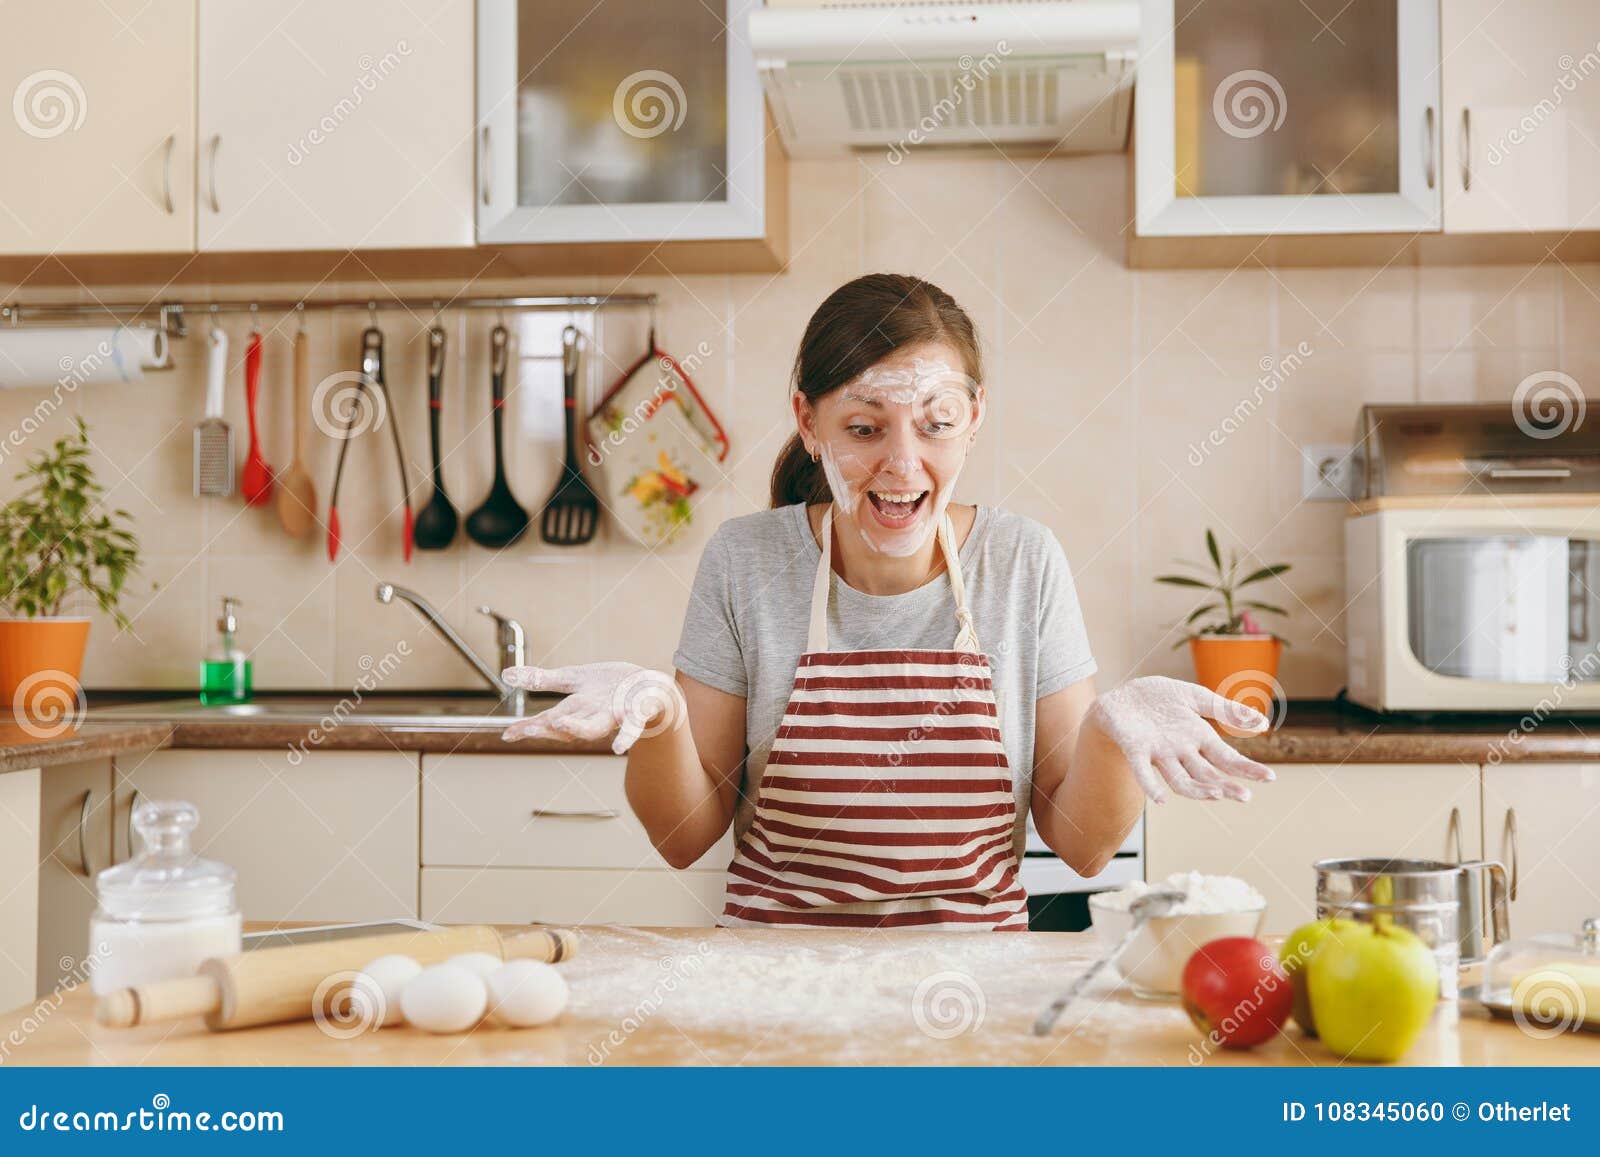 Young Beautiful Woman Is Cooking In The Kitchen Stock Photo Image Of